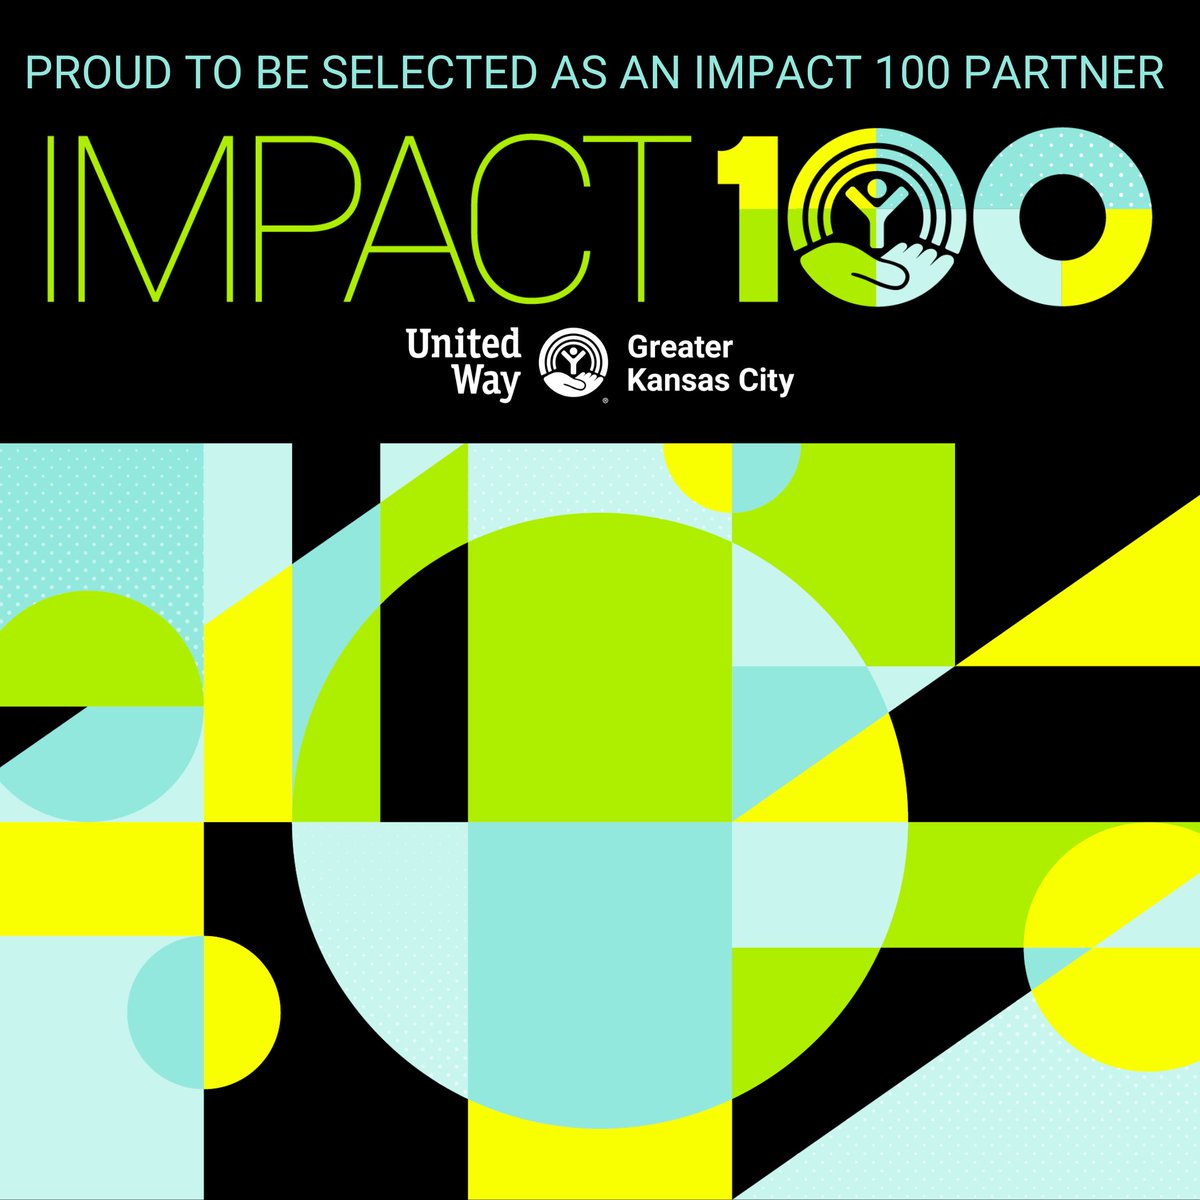 Operation Breakthrough is thrilled to continue working alongside @UnitedWayGKC, as part of its Impact 100 again this year. This designation includes 100 local nonprofits working to address our community’s most critical health and human service needs.